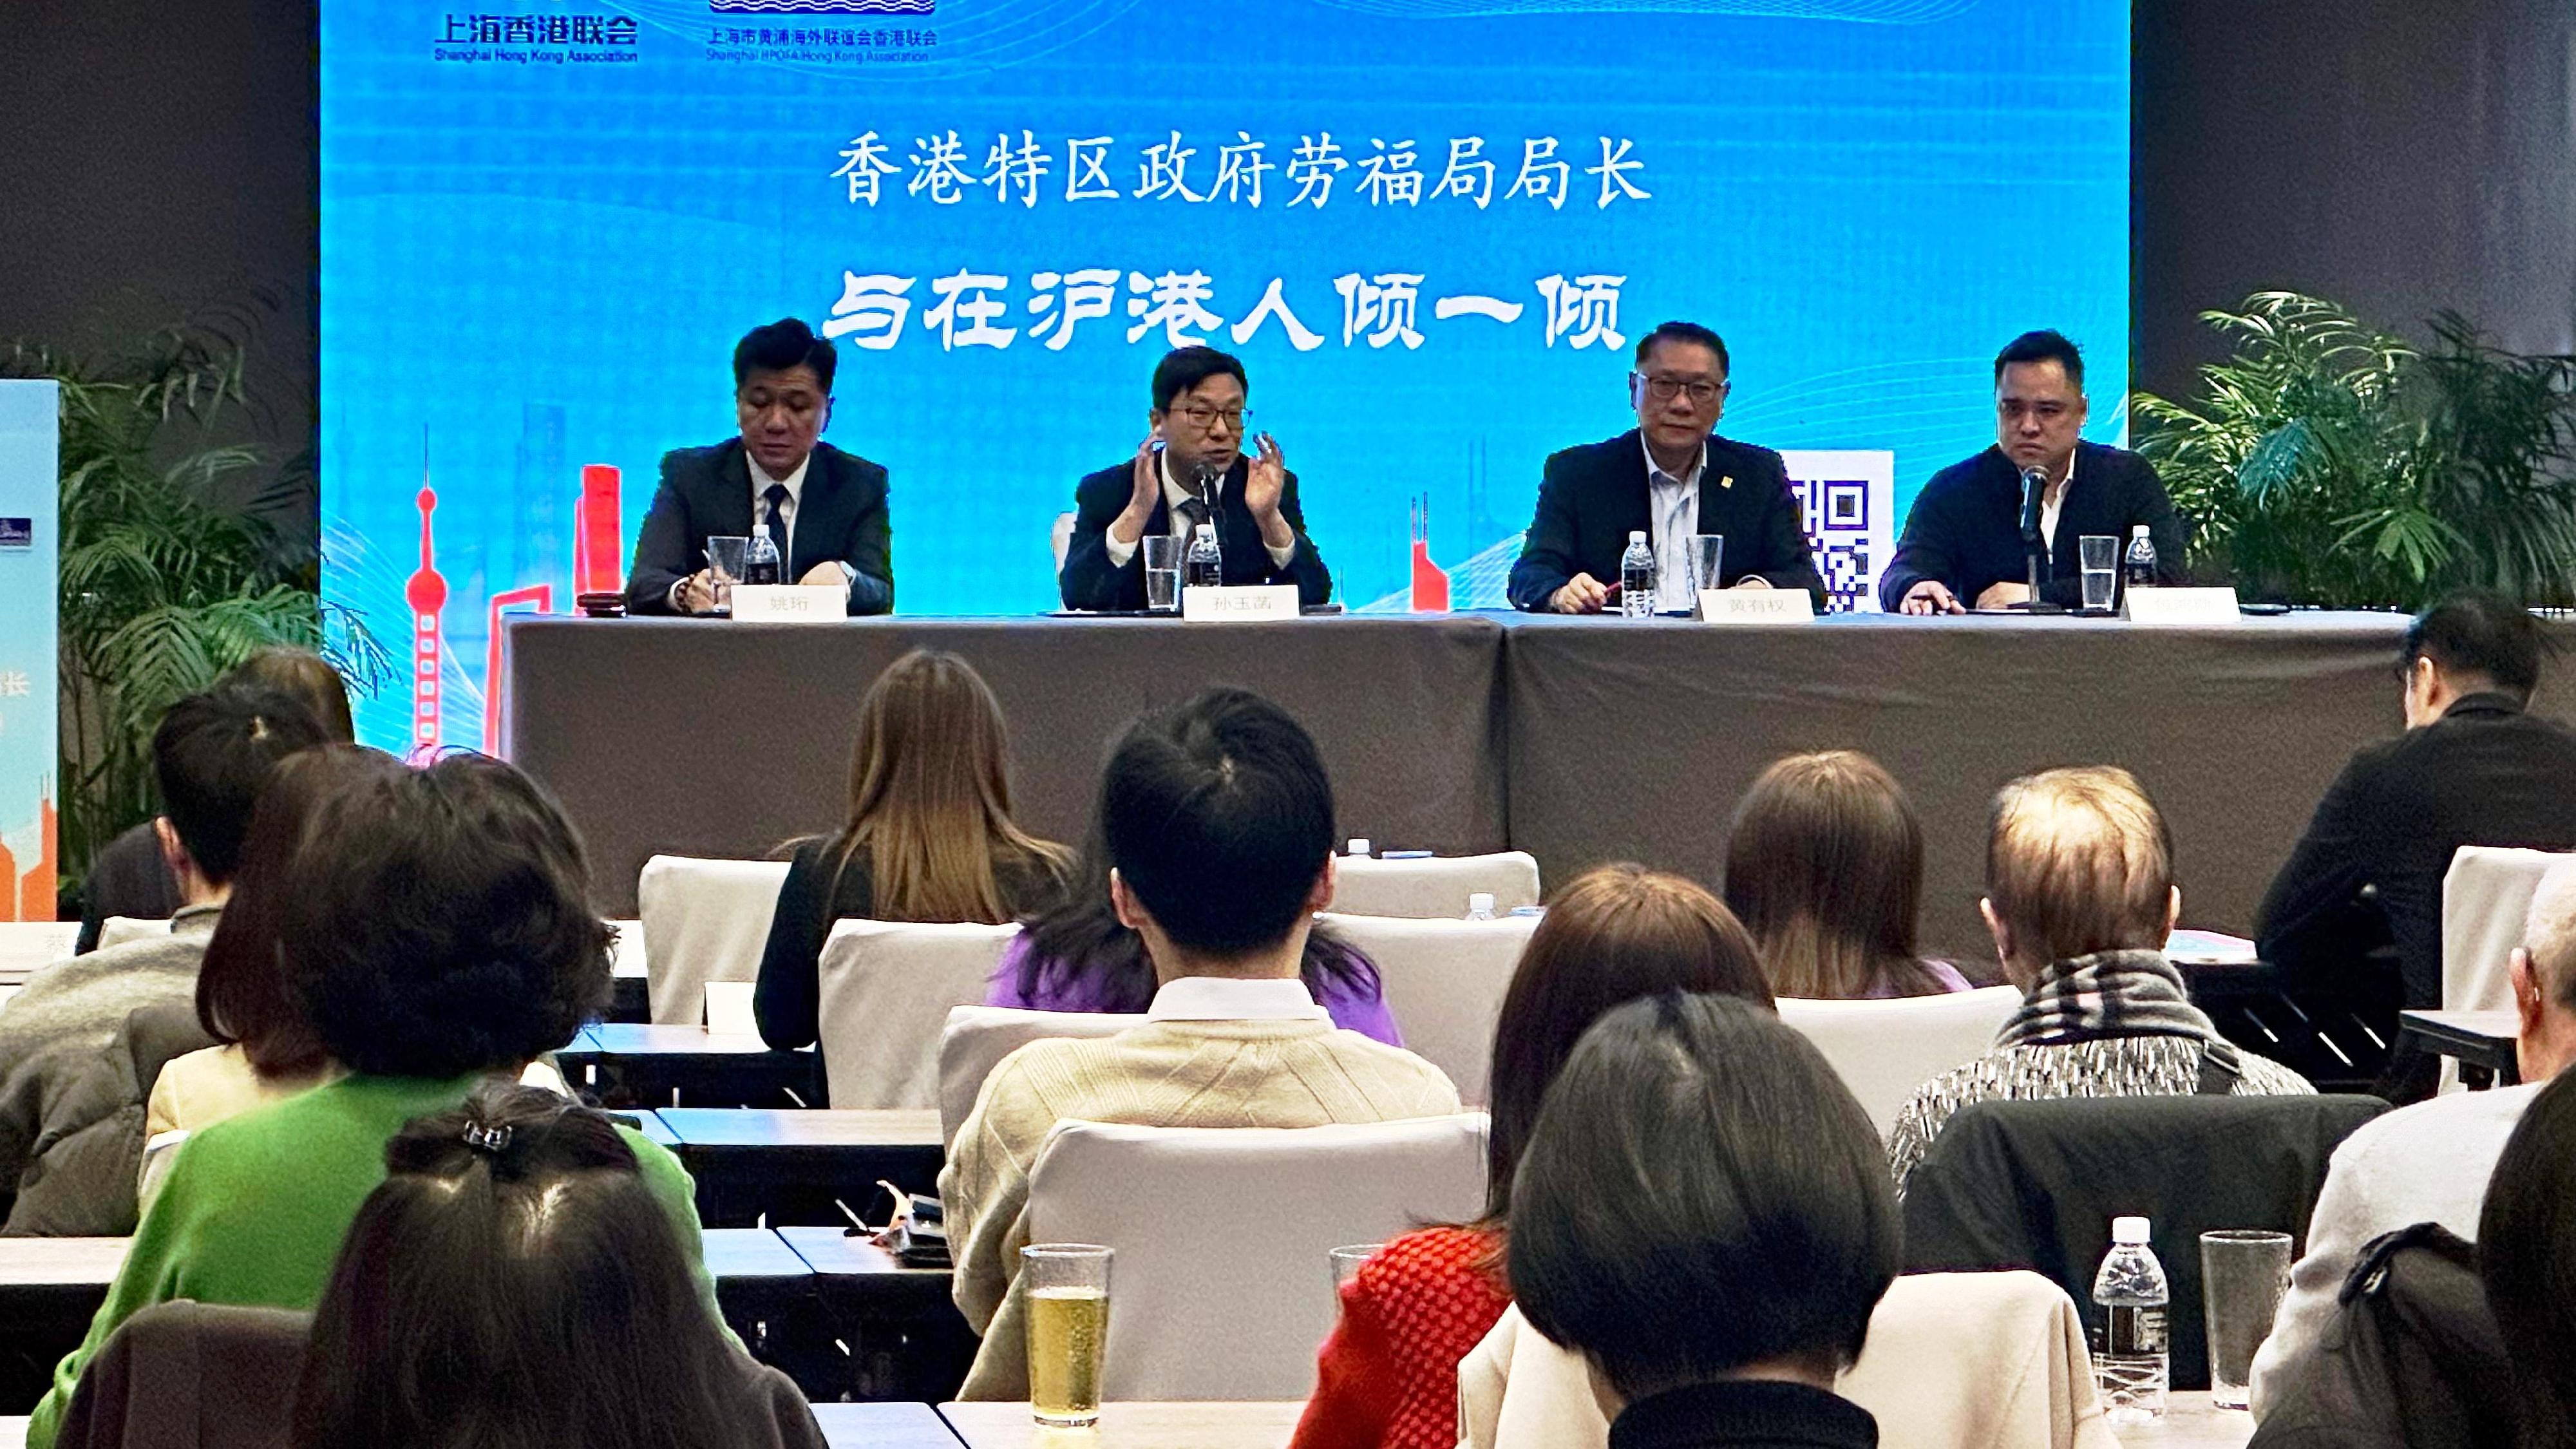 The Secretary for Labour and Welfare, Mr Chris Sun, today (January 14) concluded his visit to Shanghai. Photo shows Mr Sun (second left) at a seminar with Hong Kong people in Shanghai this afternoon to learn more about their needs while working and pursuing their development in Shanghai.